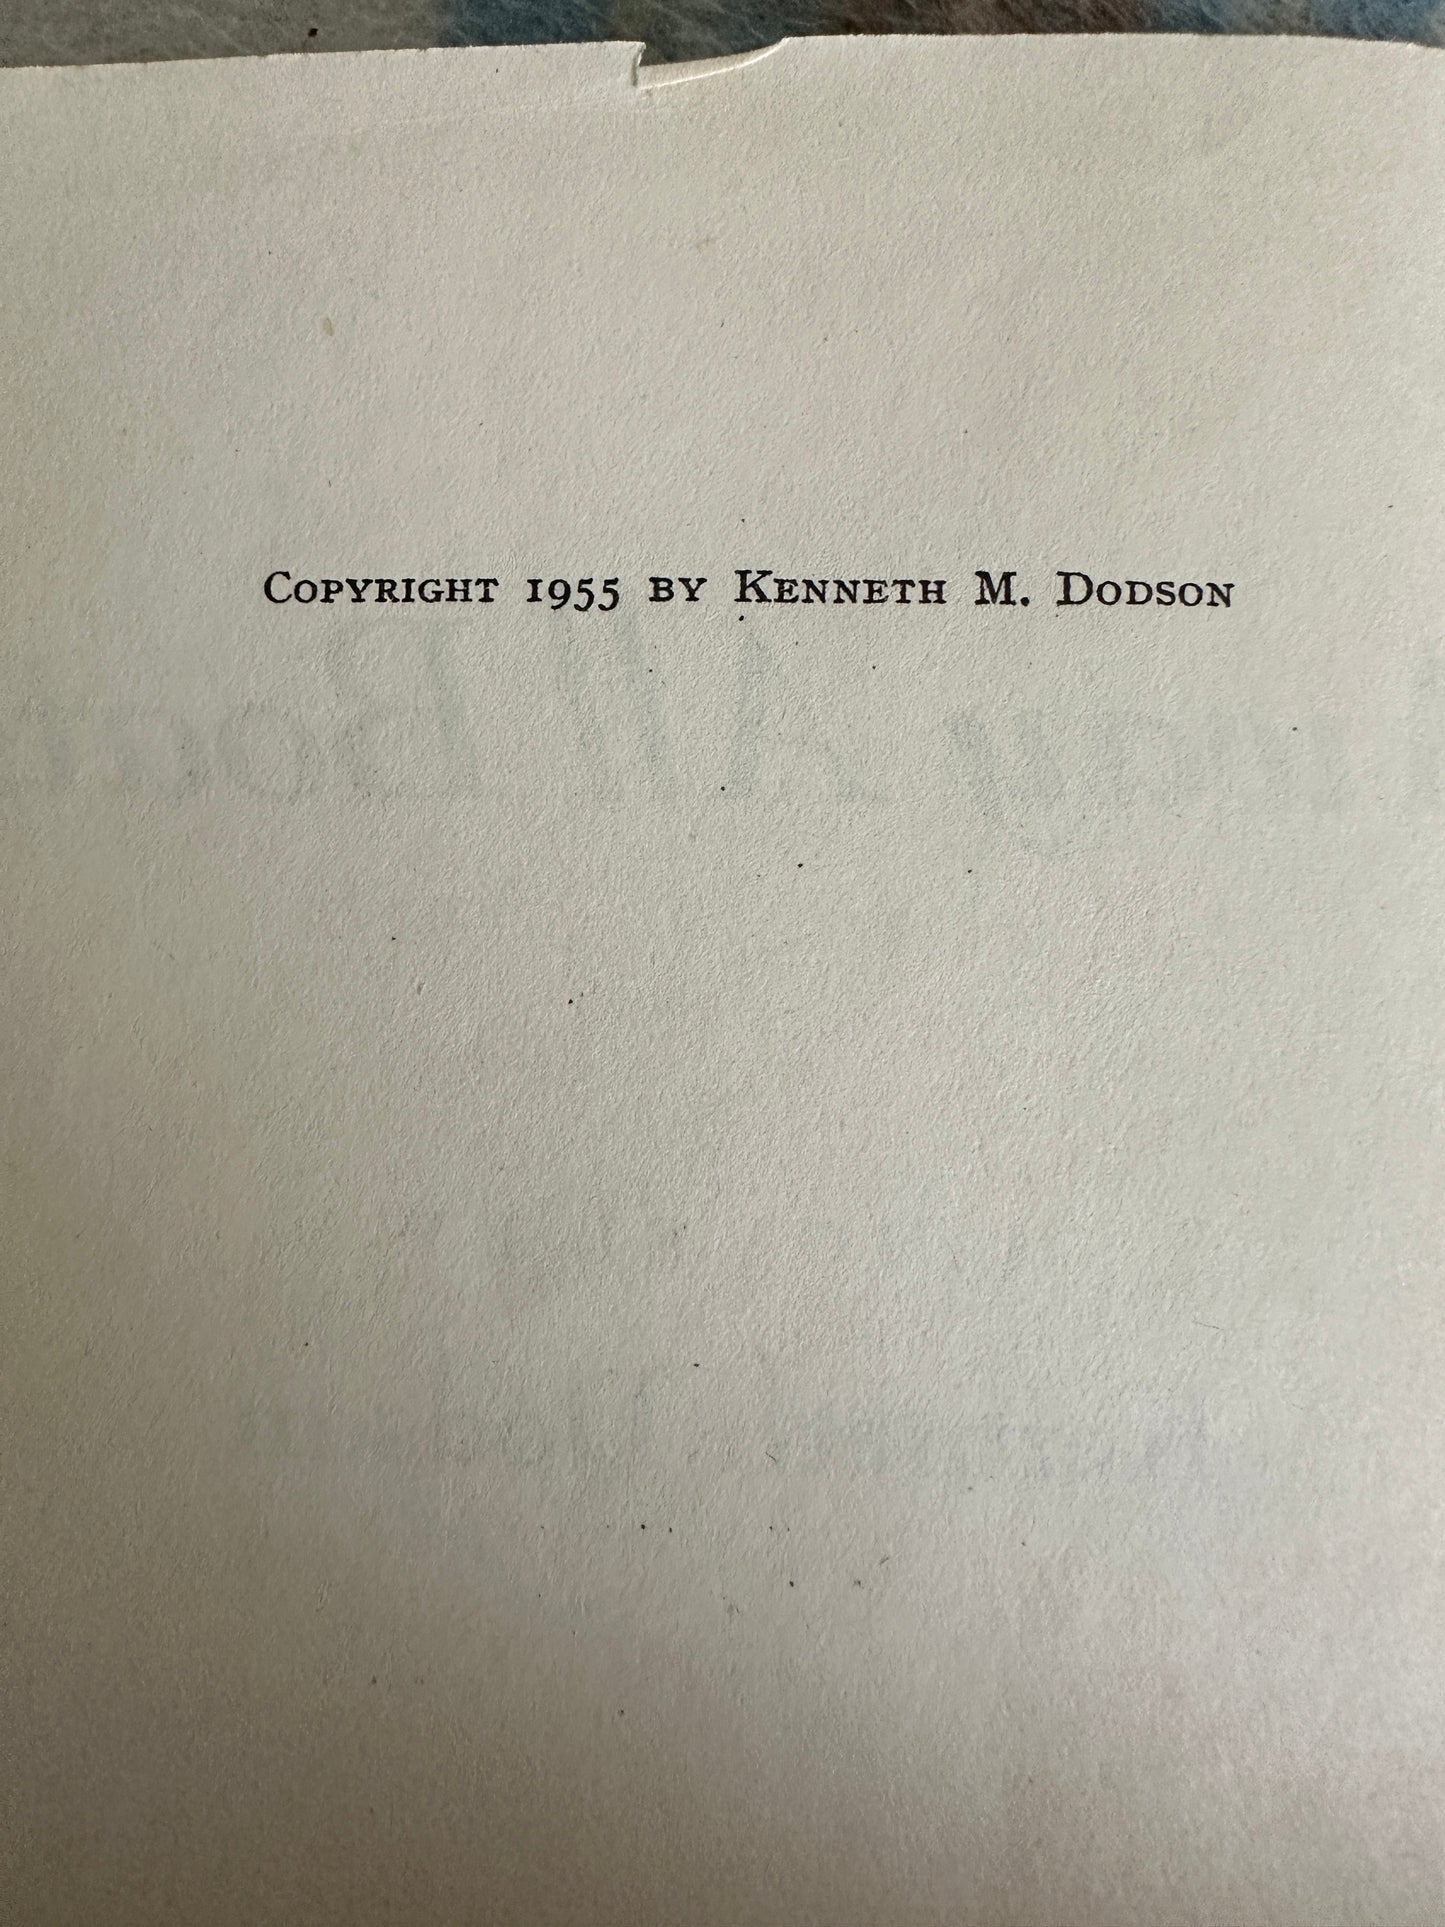 1955*1st* Away All Boats - Kenneth Dobson(Angus & Robertson)